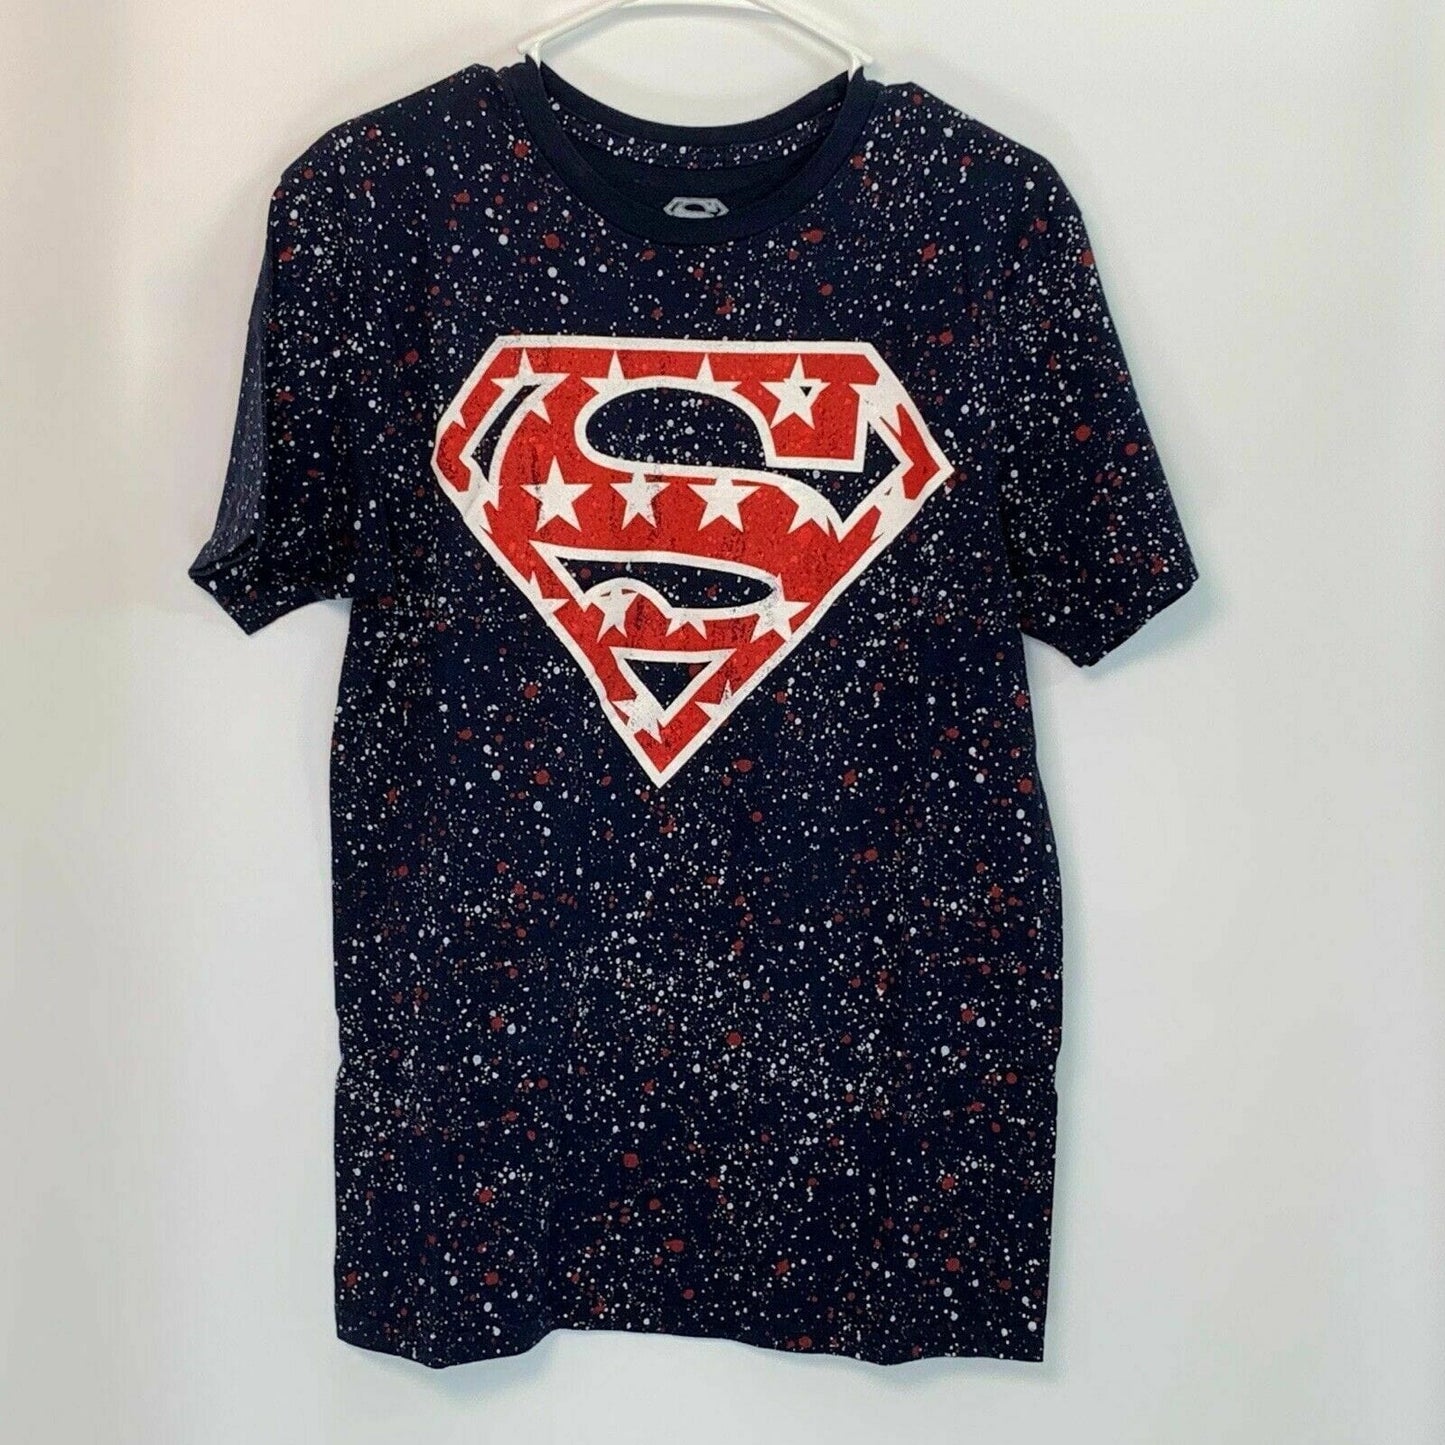 Powerful Superman Blue Graphic Tee - Size L - Very Good Condition